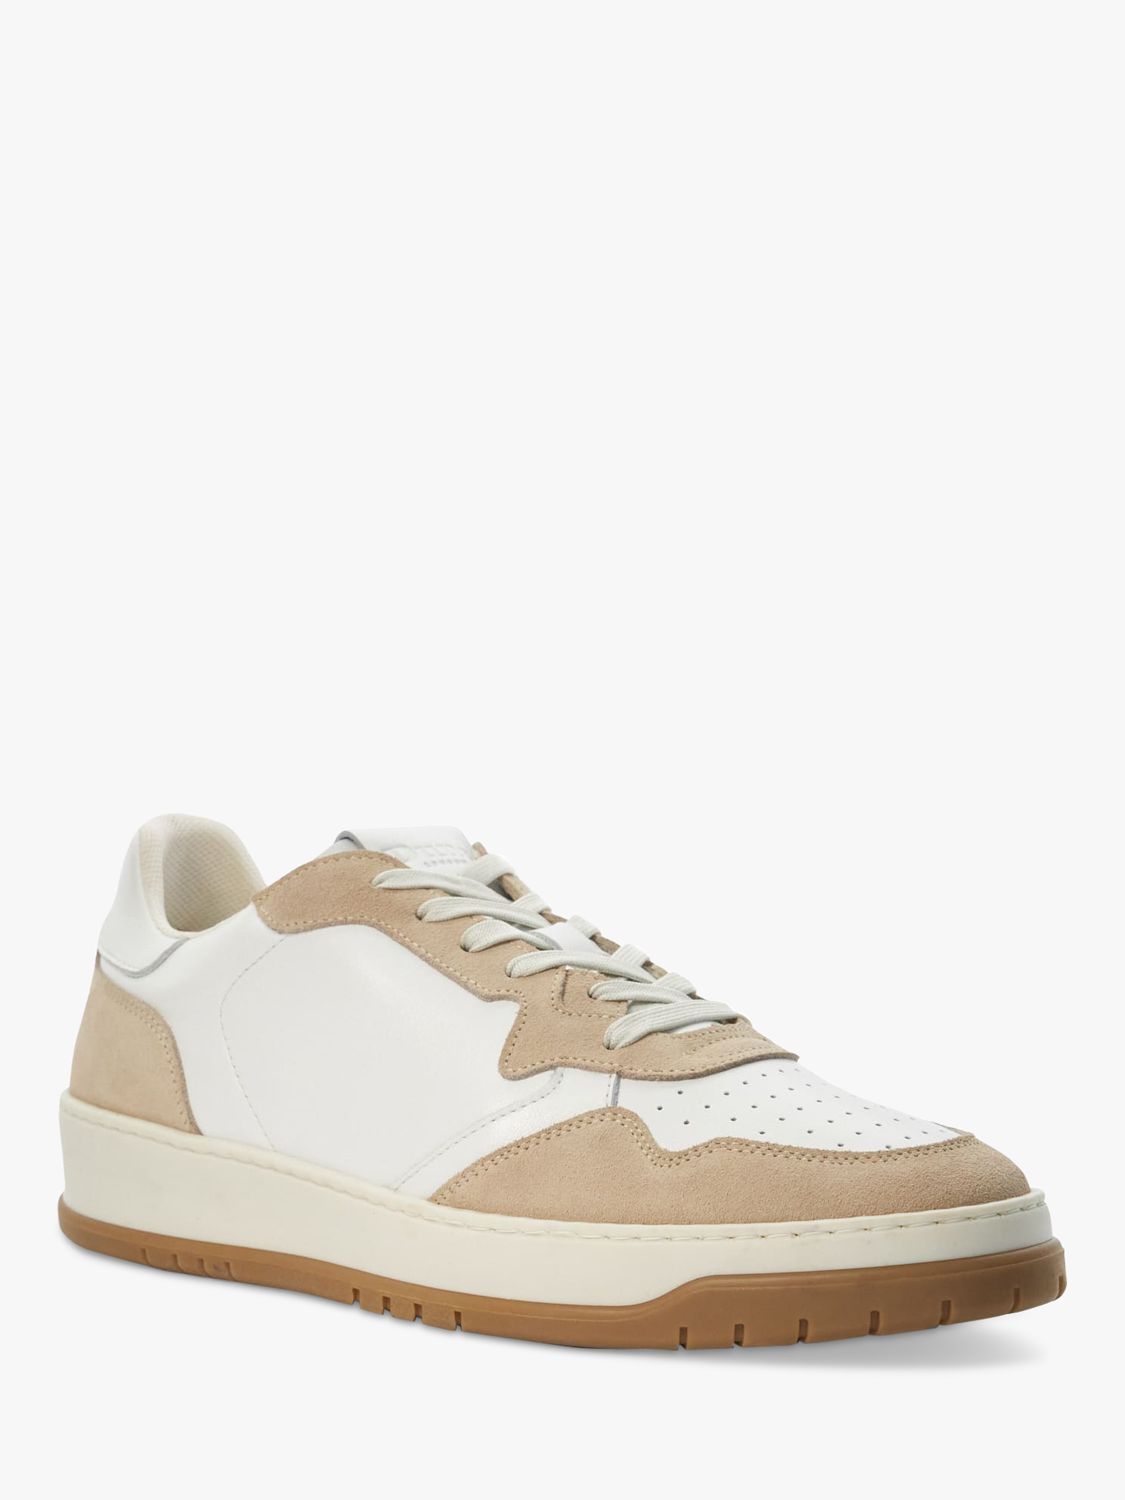 Dune Trent Leather Low Top Trainers, Beige/White, 6